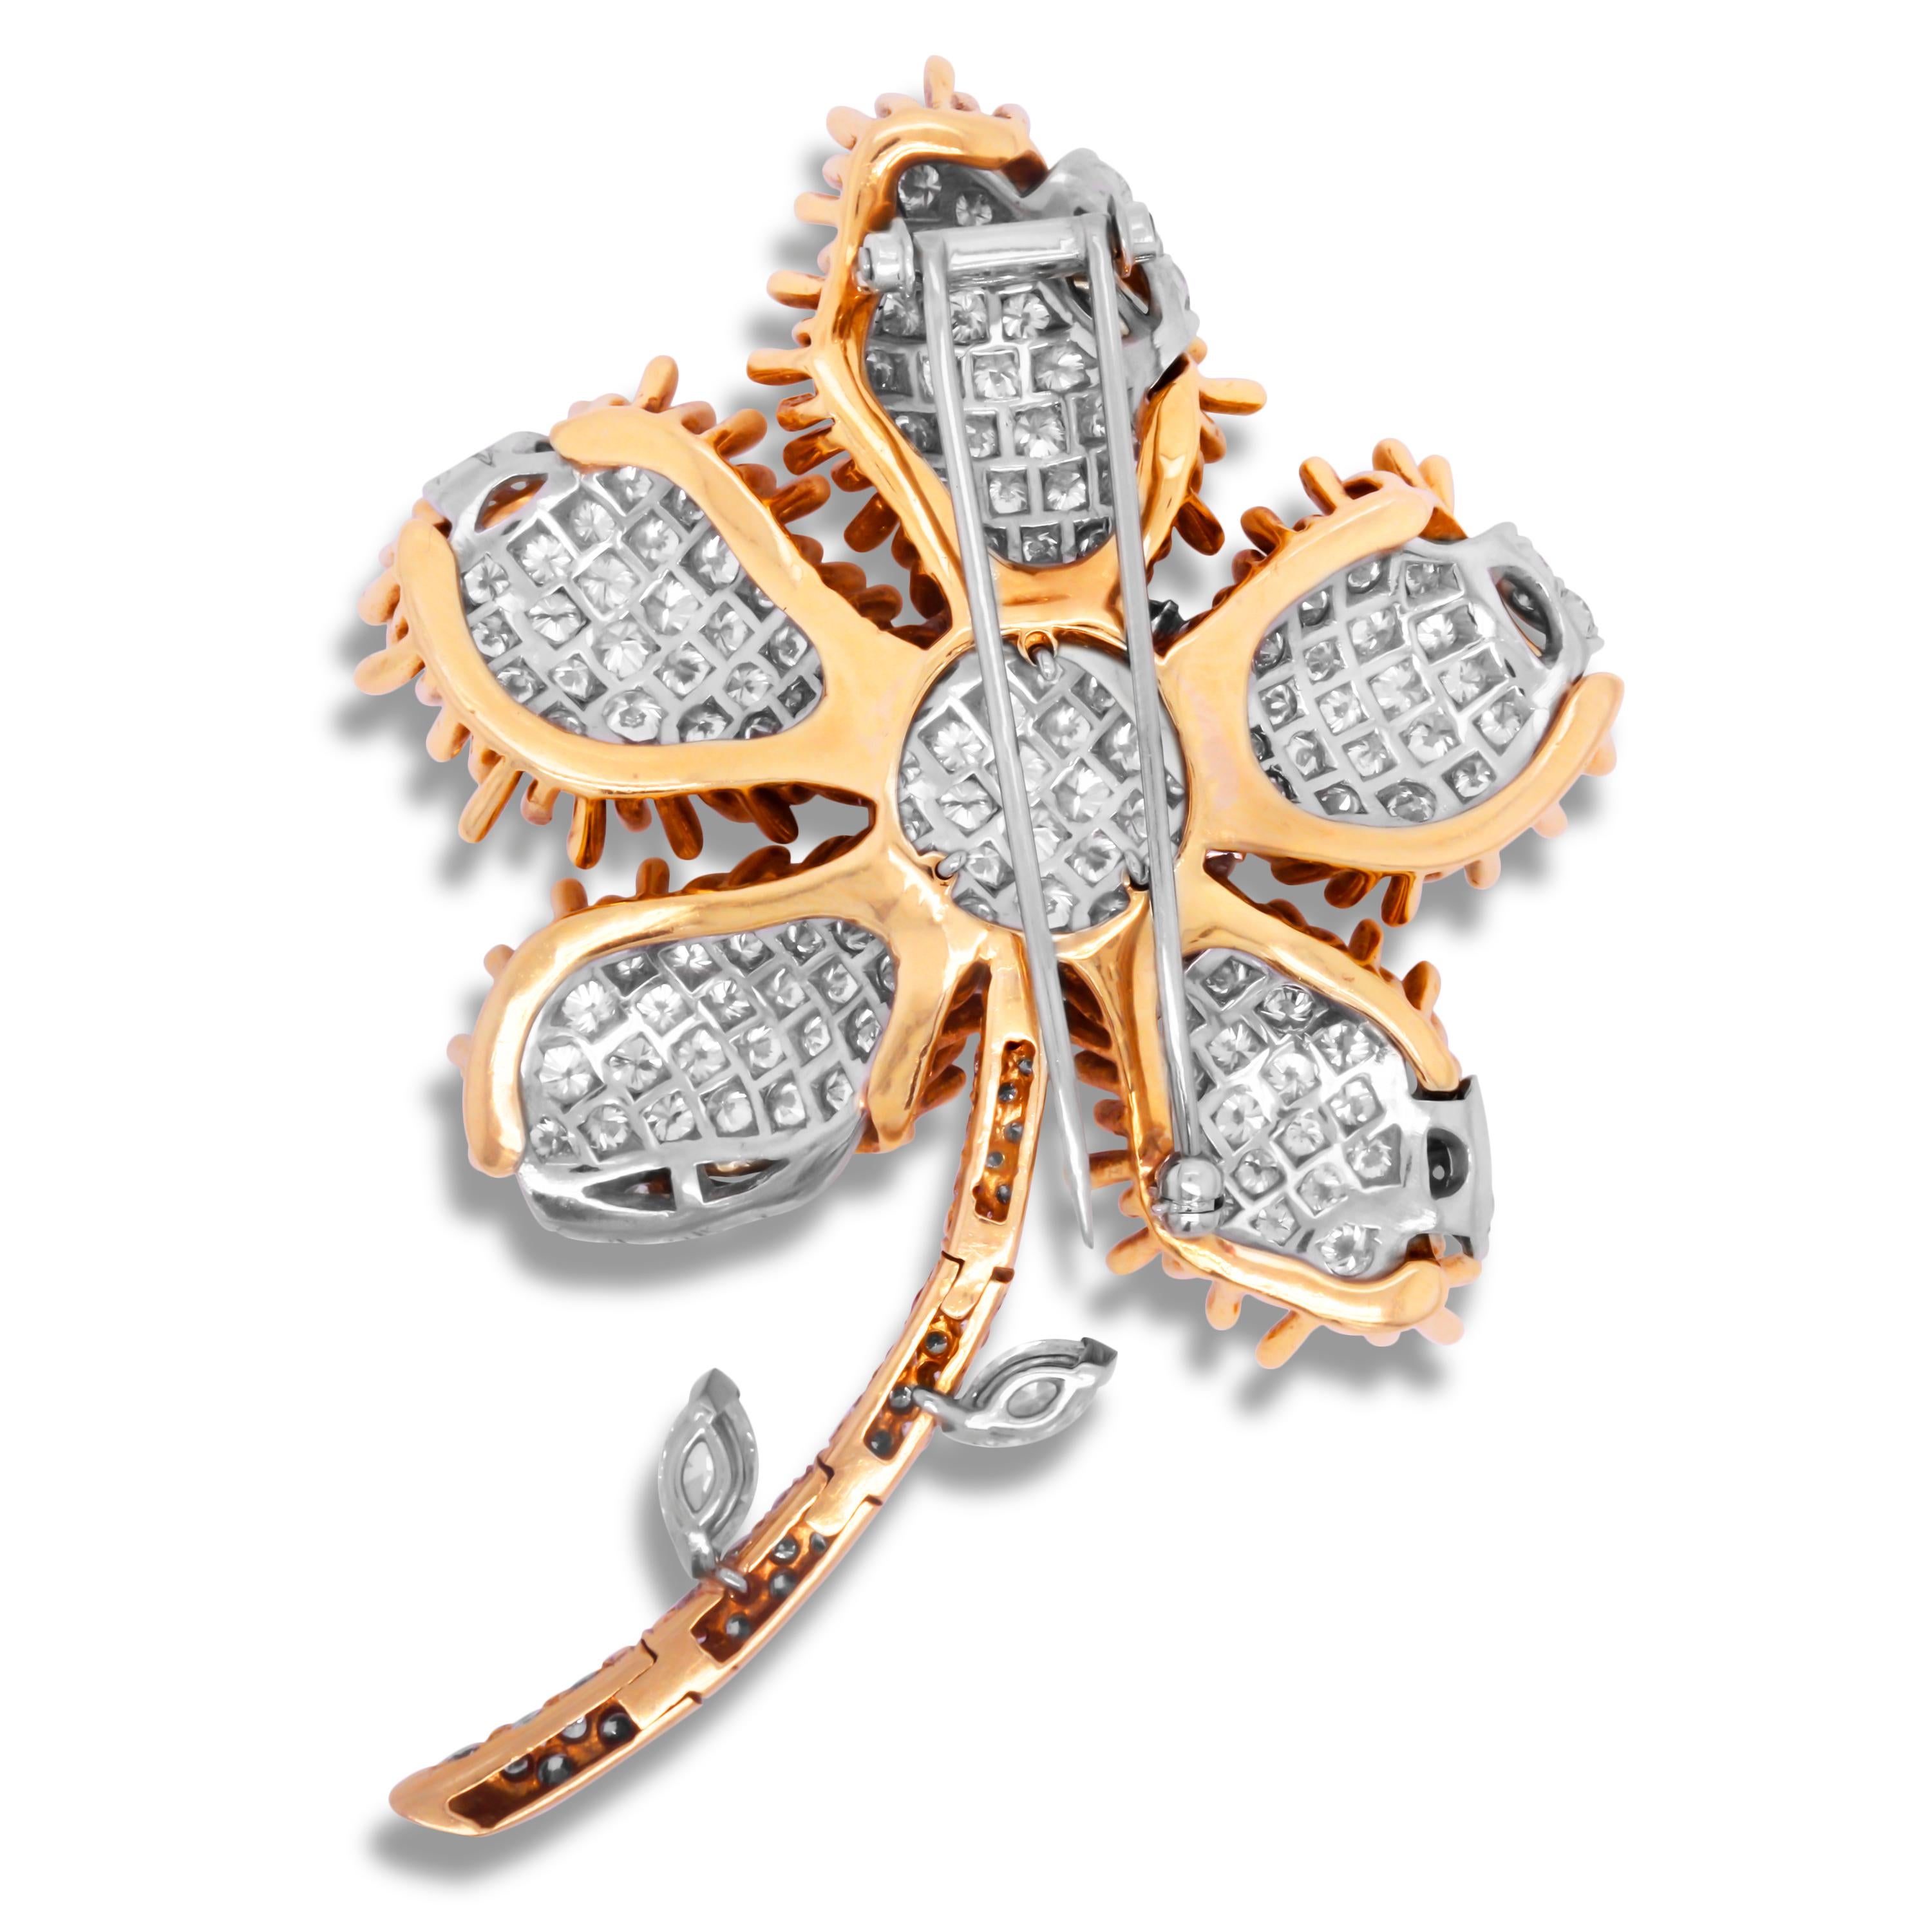 Vintage 18K Yellow White Gold Round and Marquise Cut Diamond Flower Brooch Pin

This incredible Brooch features a 3D, flower design with pavé set diamonds set all throughout. On the 